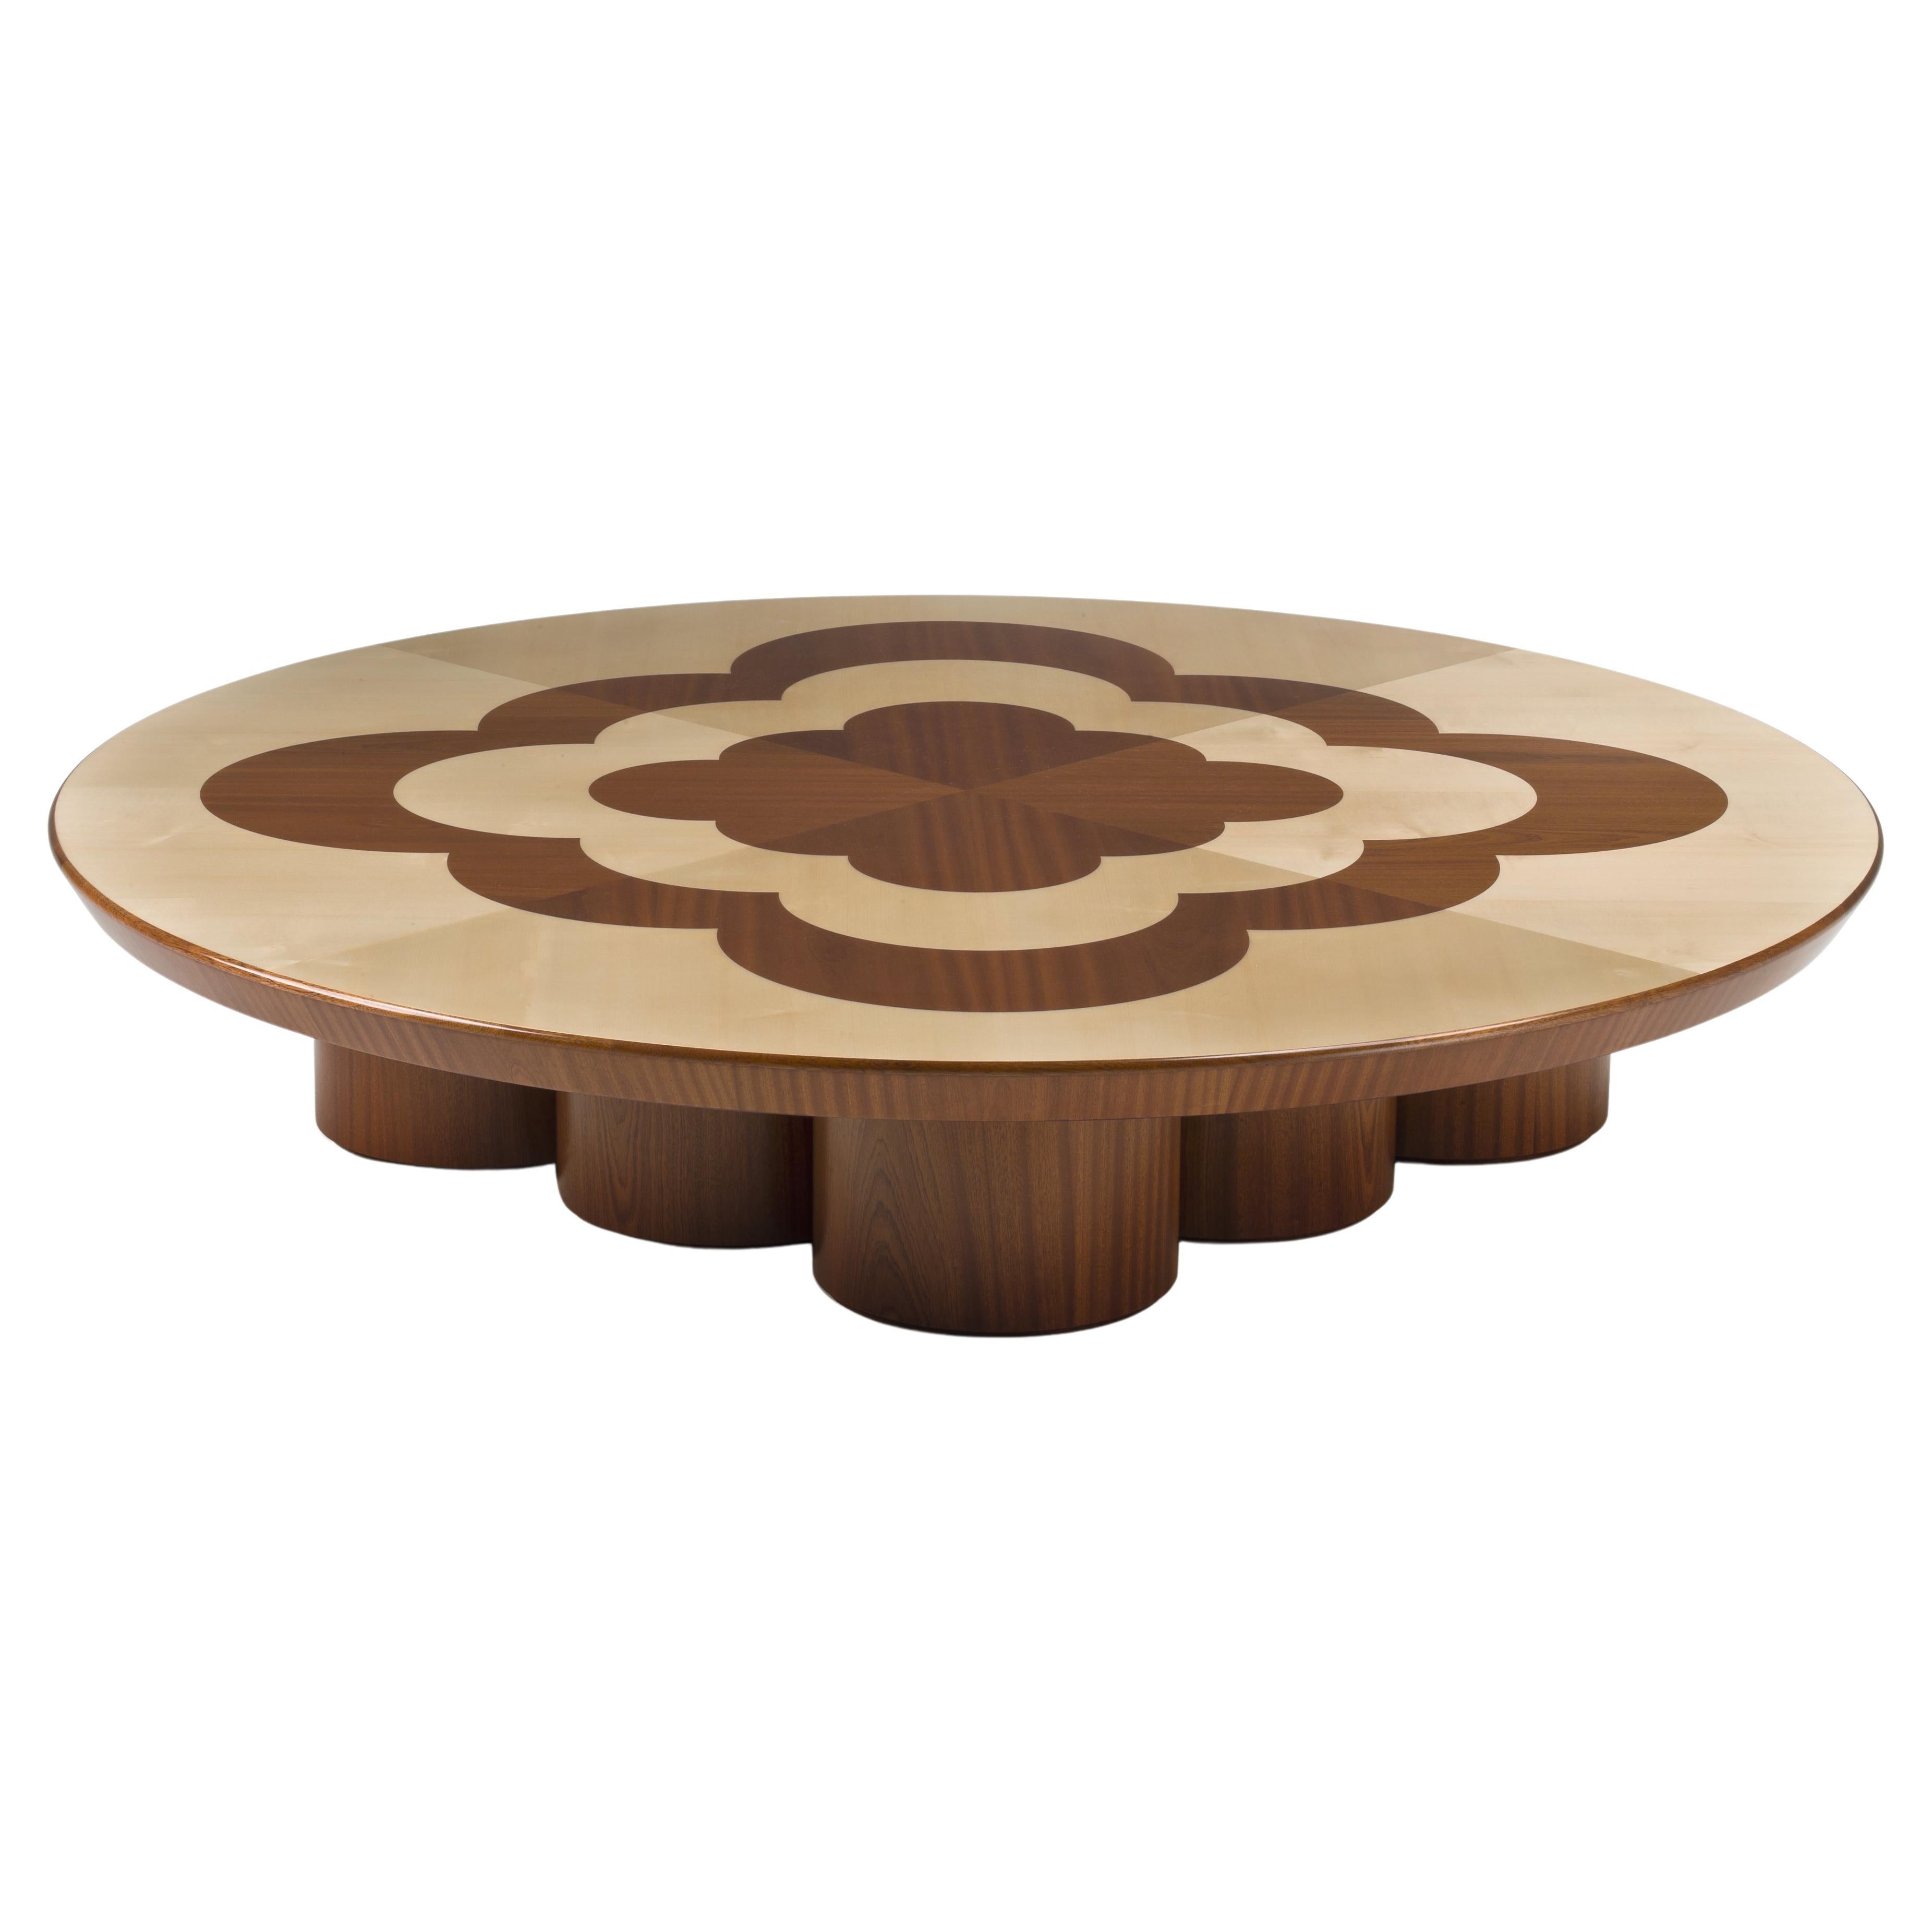 ARCHWAY CT Inlay Round Cocktail Table with Flower in Mahogany and Maple wood